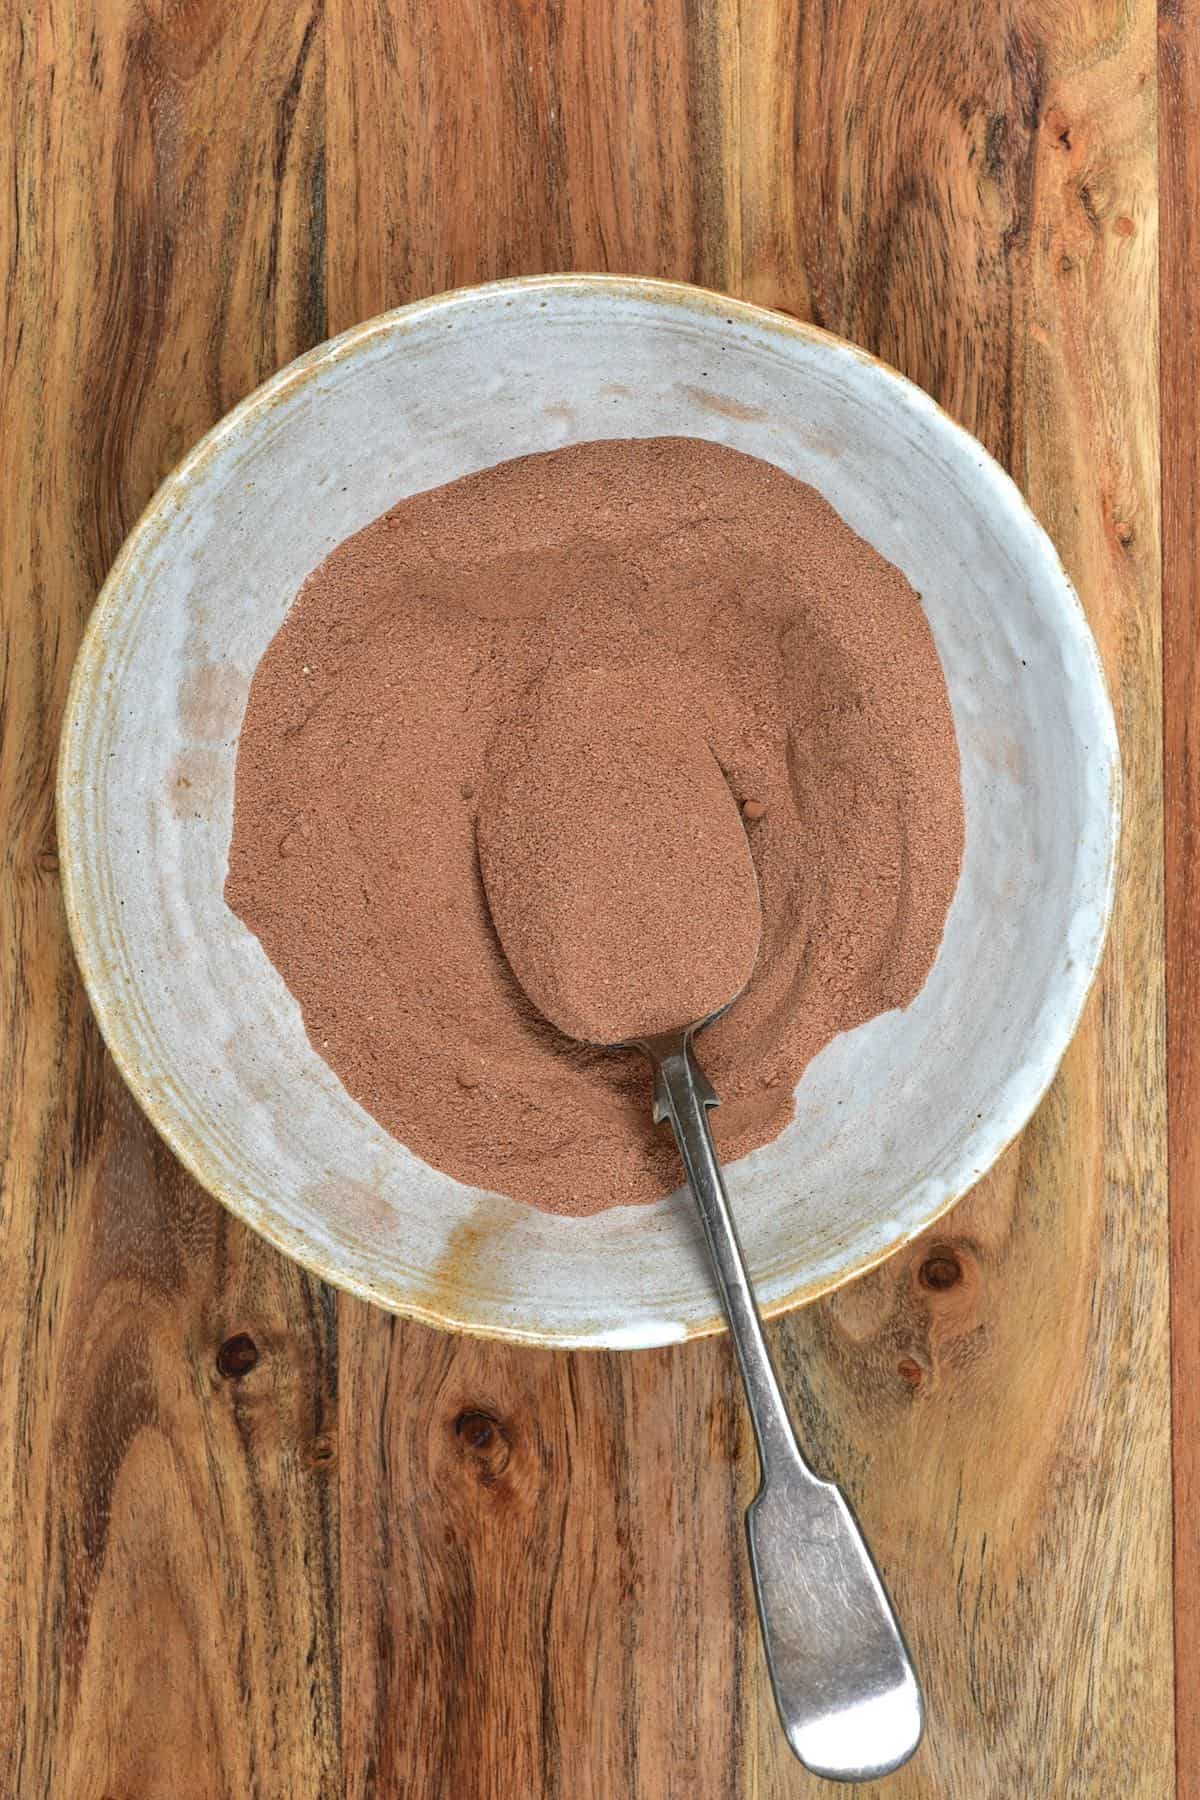 Hot chocolate mix in a bowl